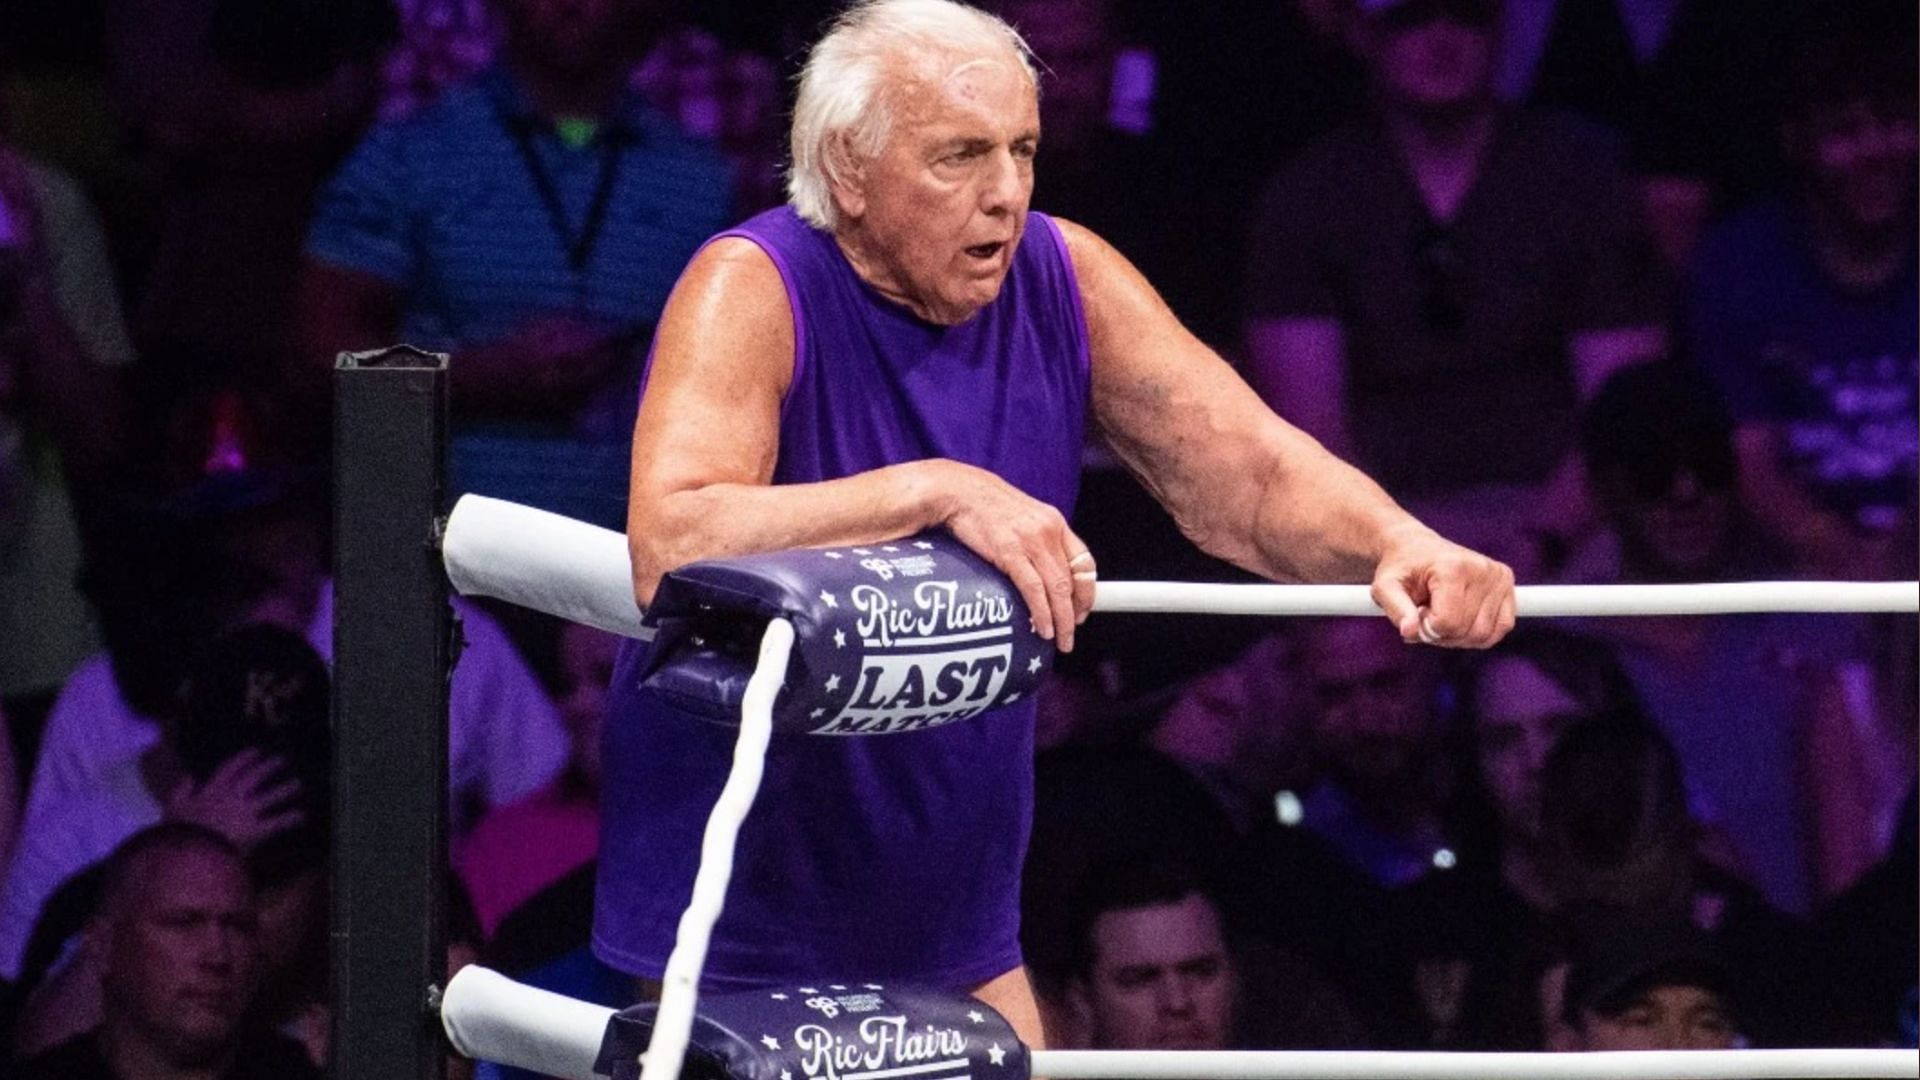 Ric Flair wrestled his last match on July 31st